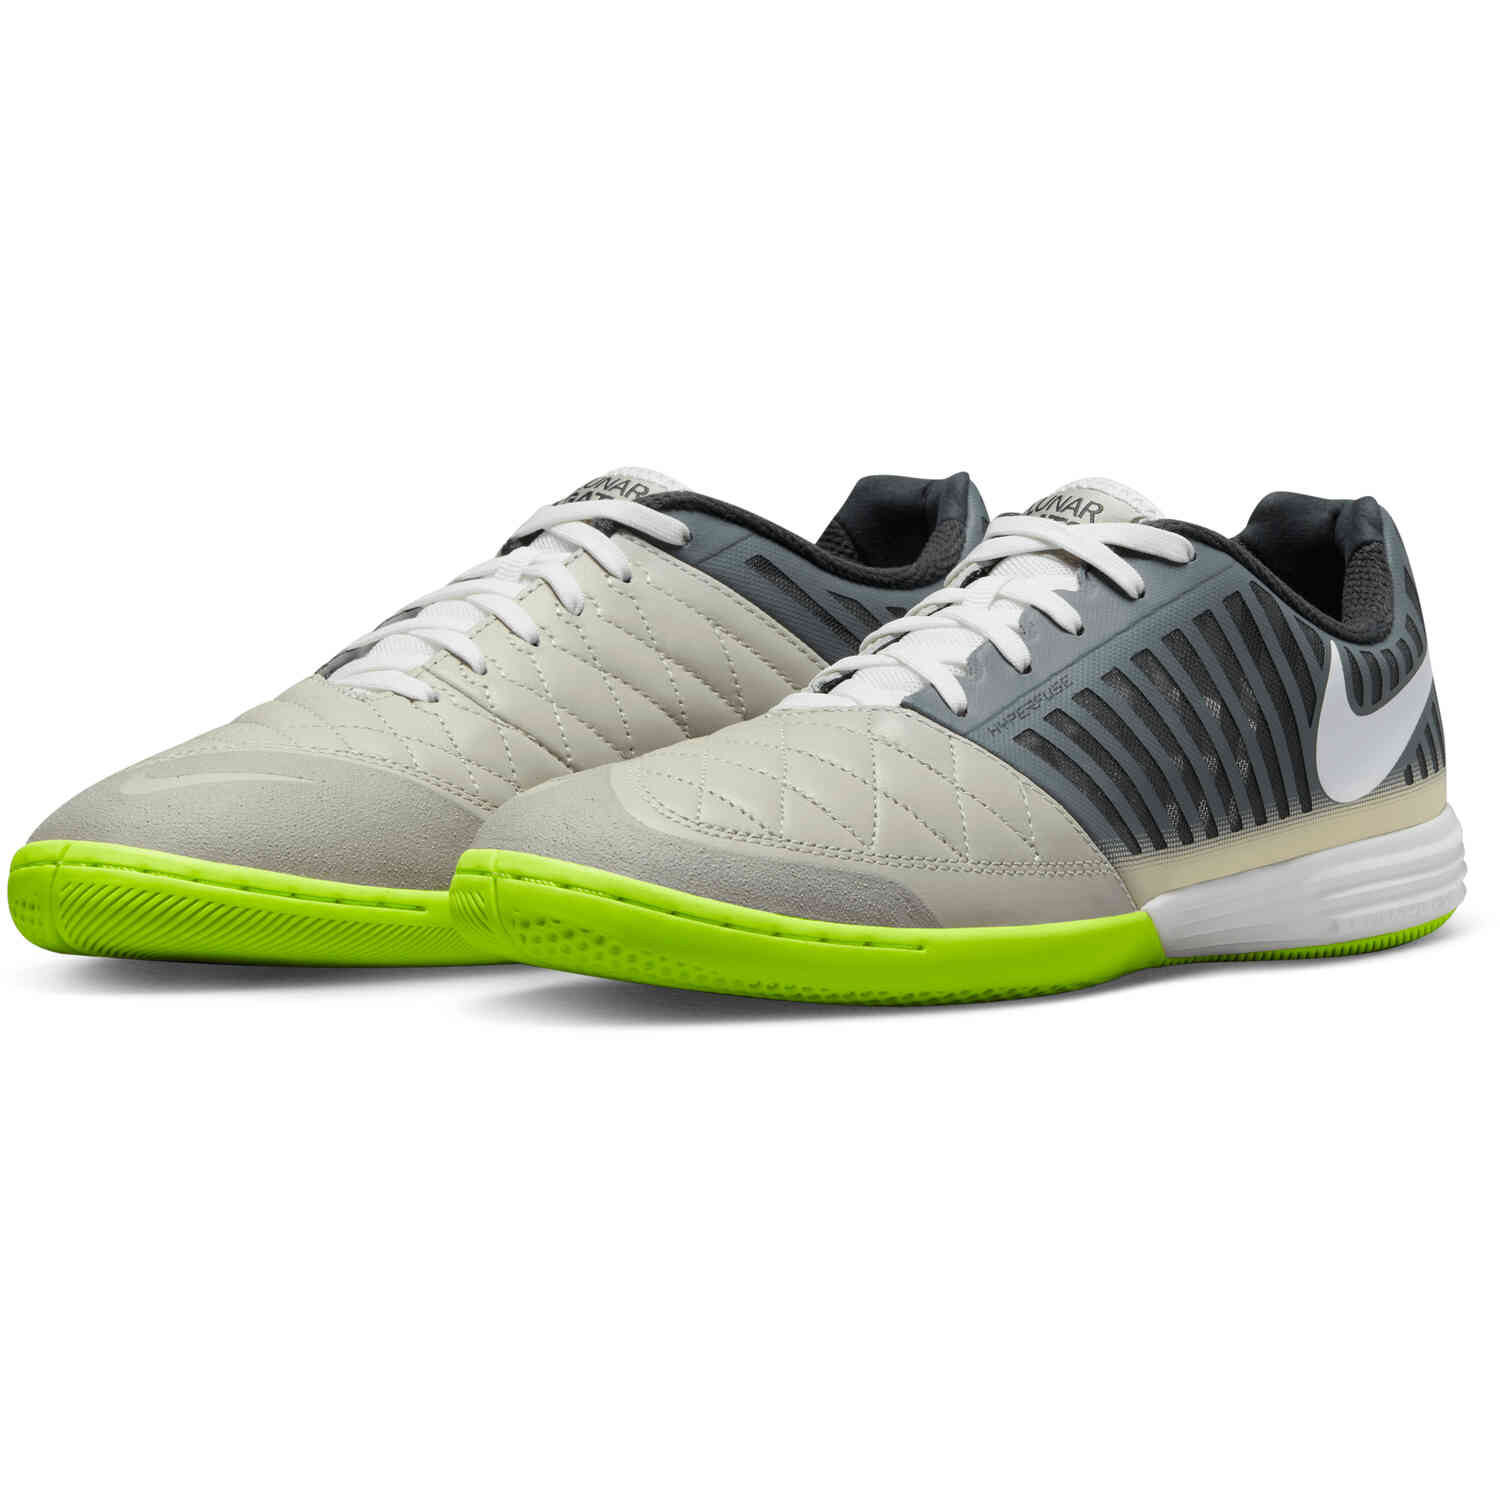 Lunargato II IC - Smoke Grey & White with Anthracite with -